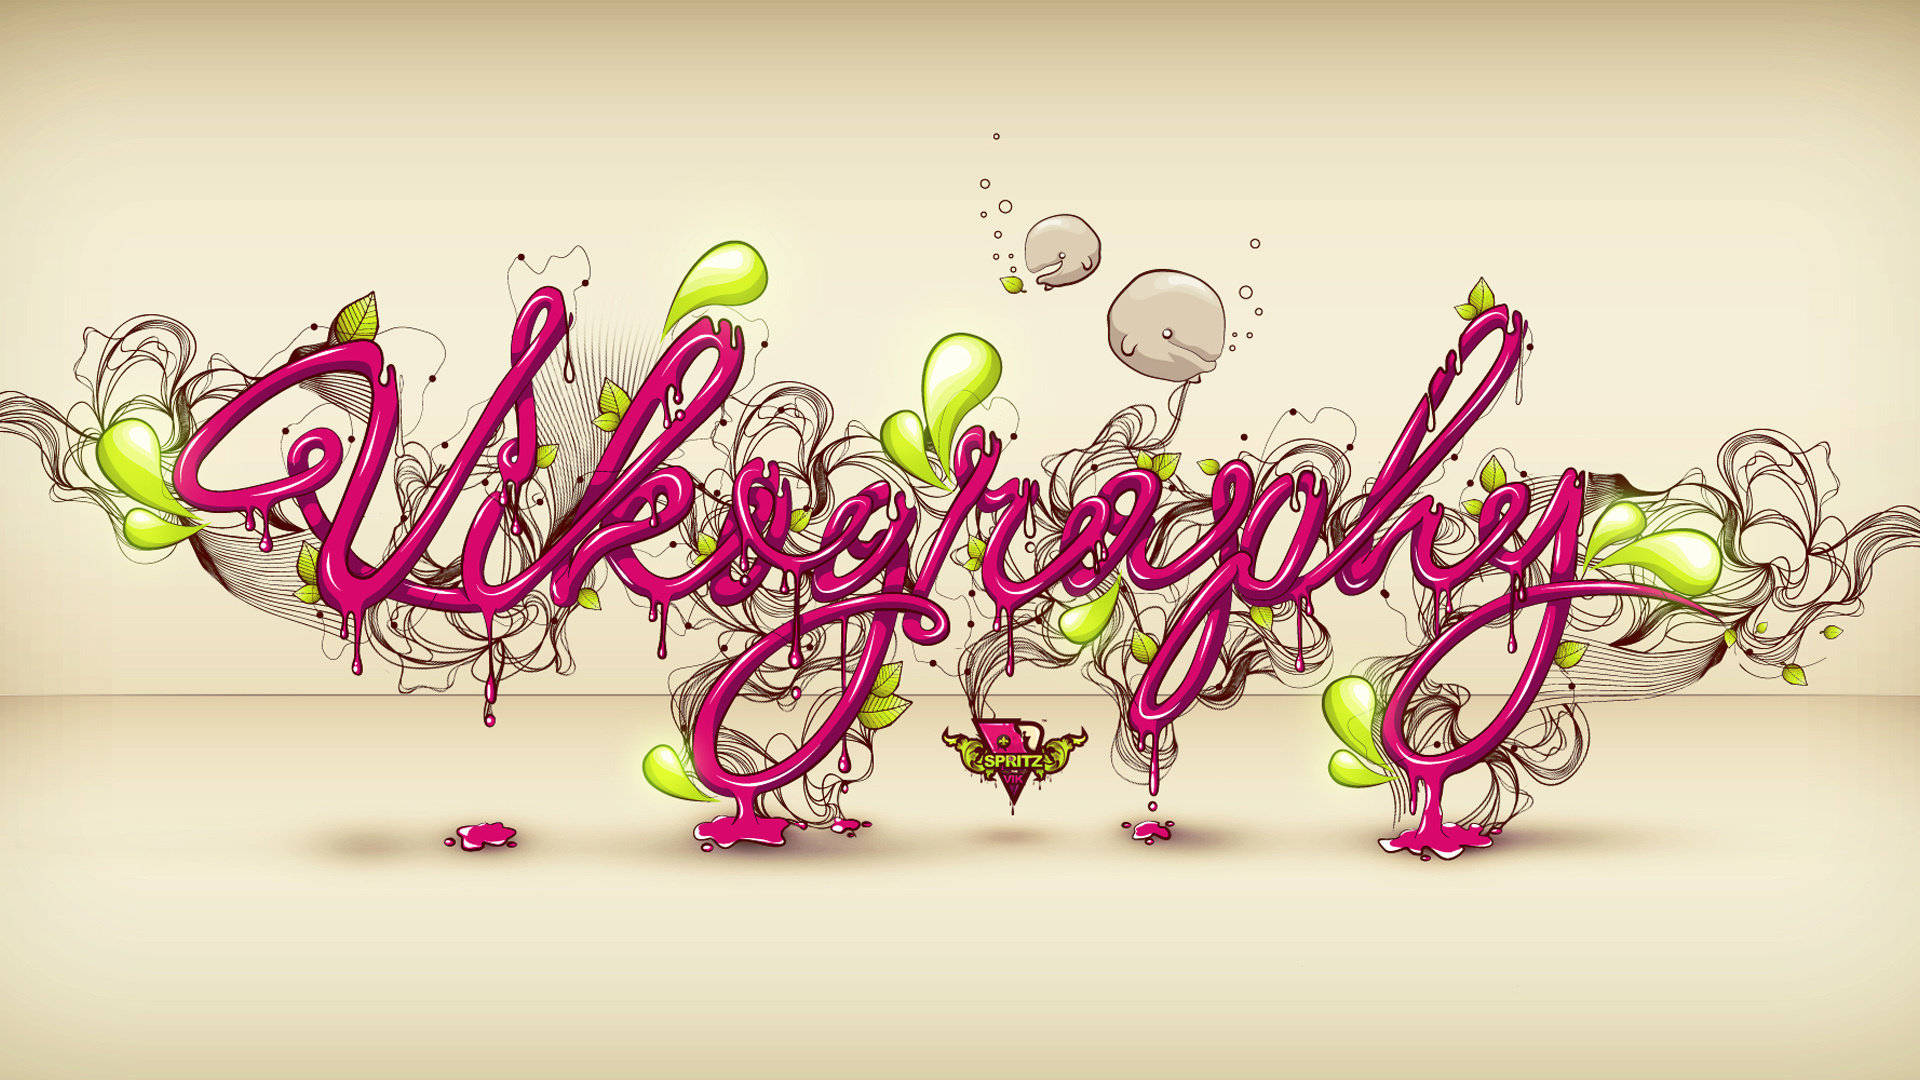 Cute Artistic Typography